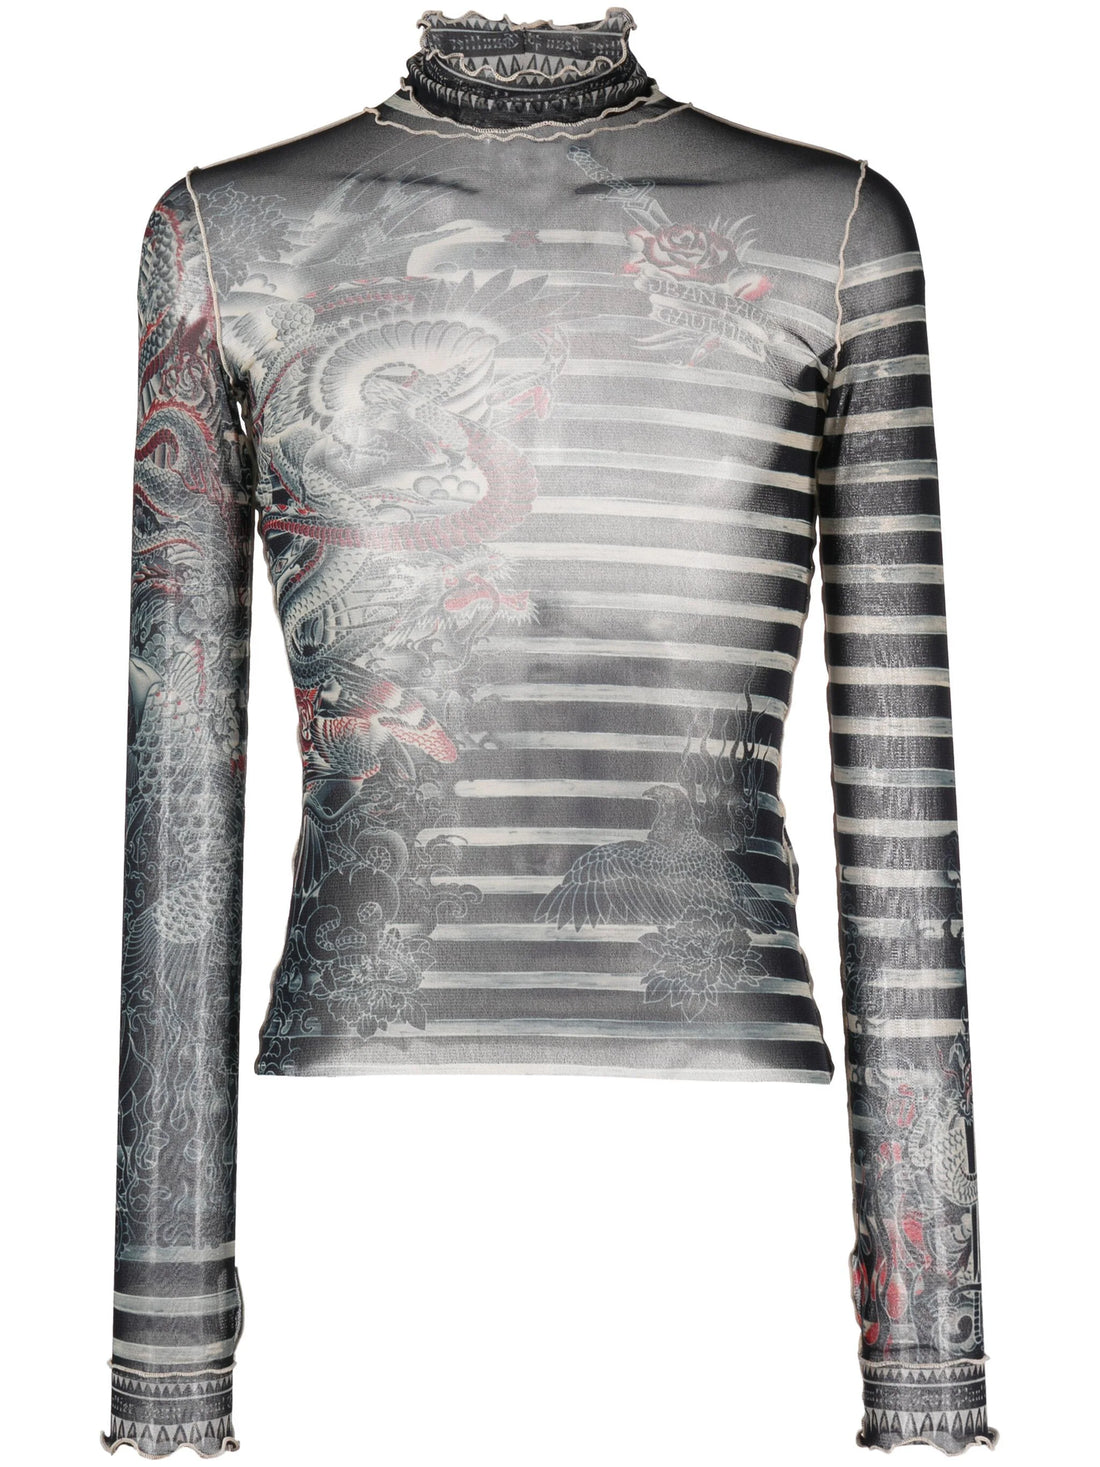 JEAN PAUL GAULTIER UNISEX Graphic Printed Long Sleeves Top Navy/Blue/White - MAISONDEFASHION.COM